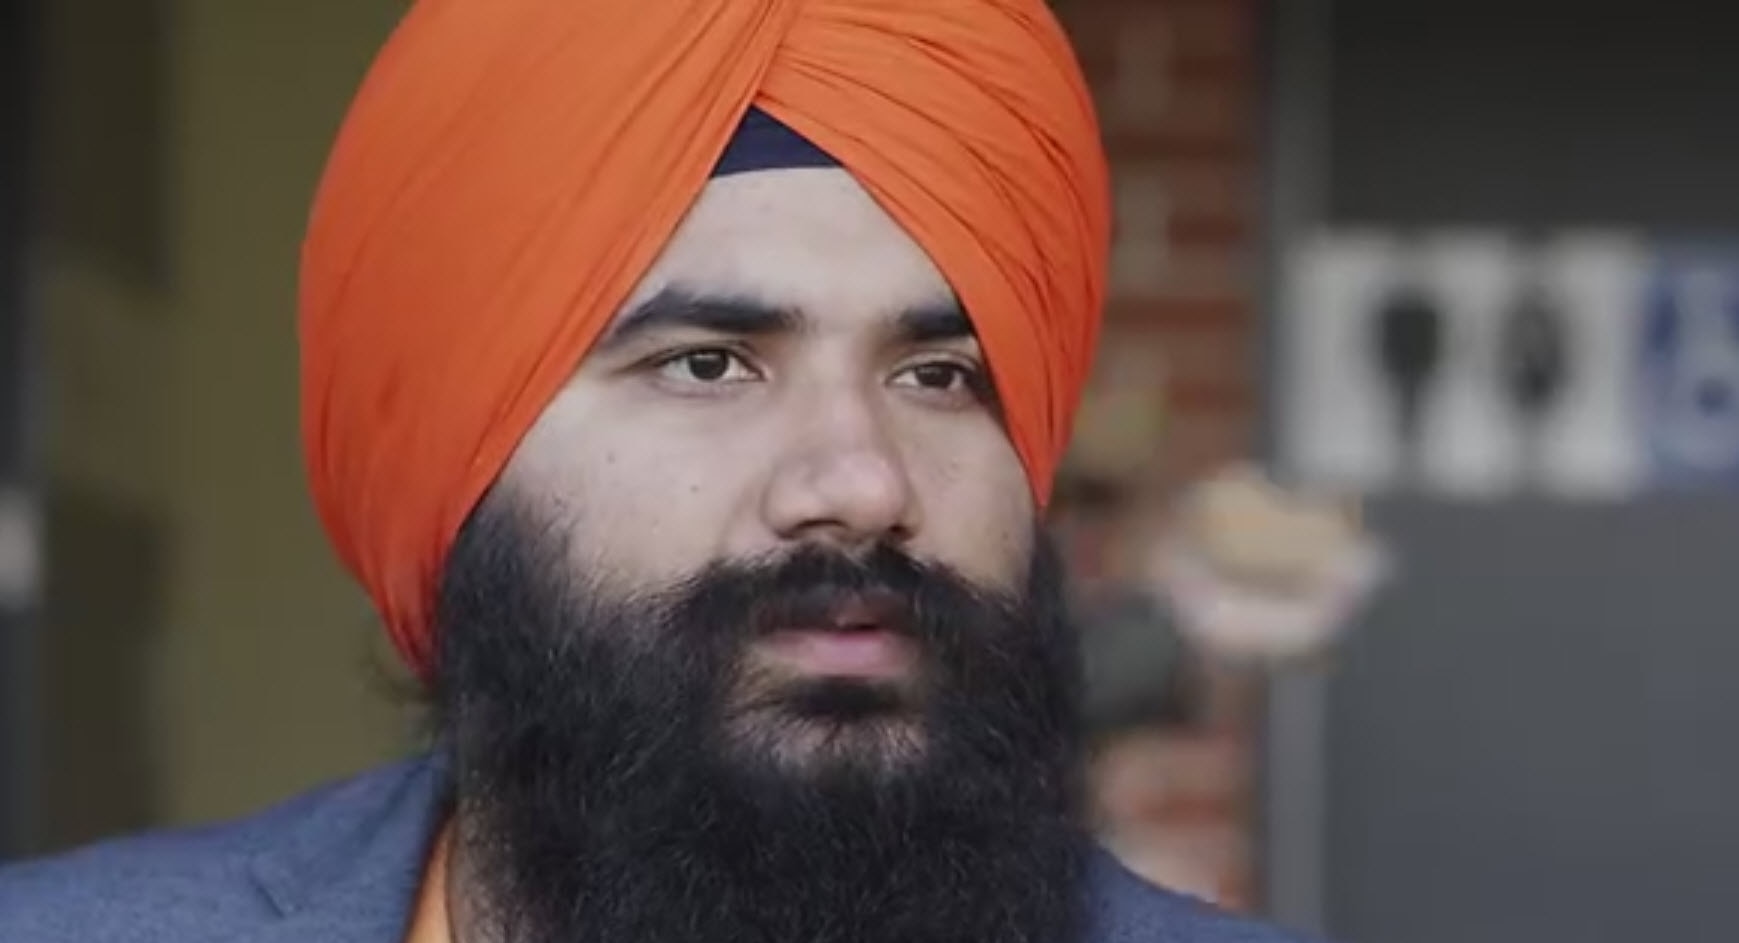 Gurpreet Singh Grewal, is conspicuous at the Giants games with his saffron turban